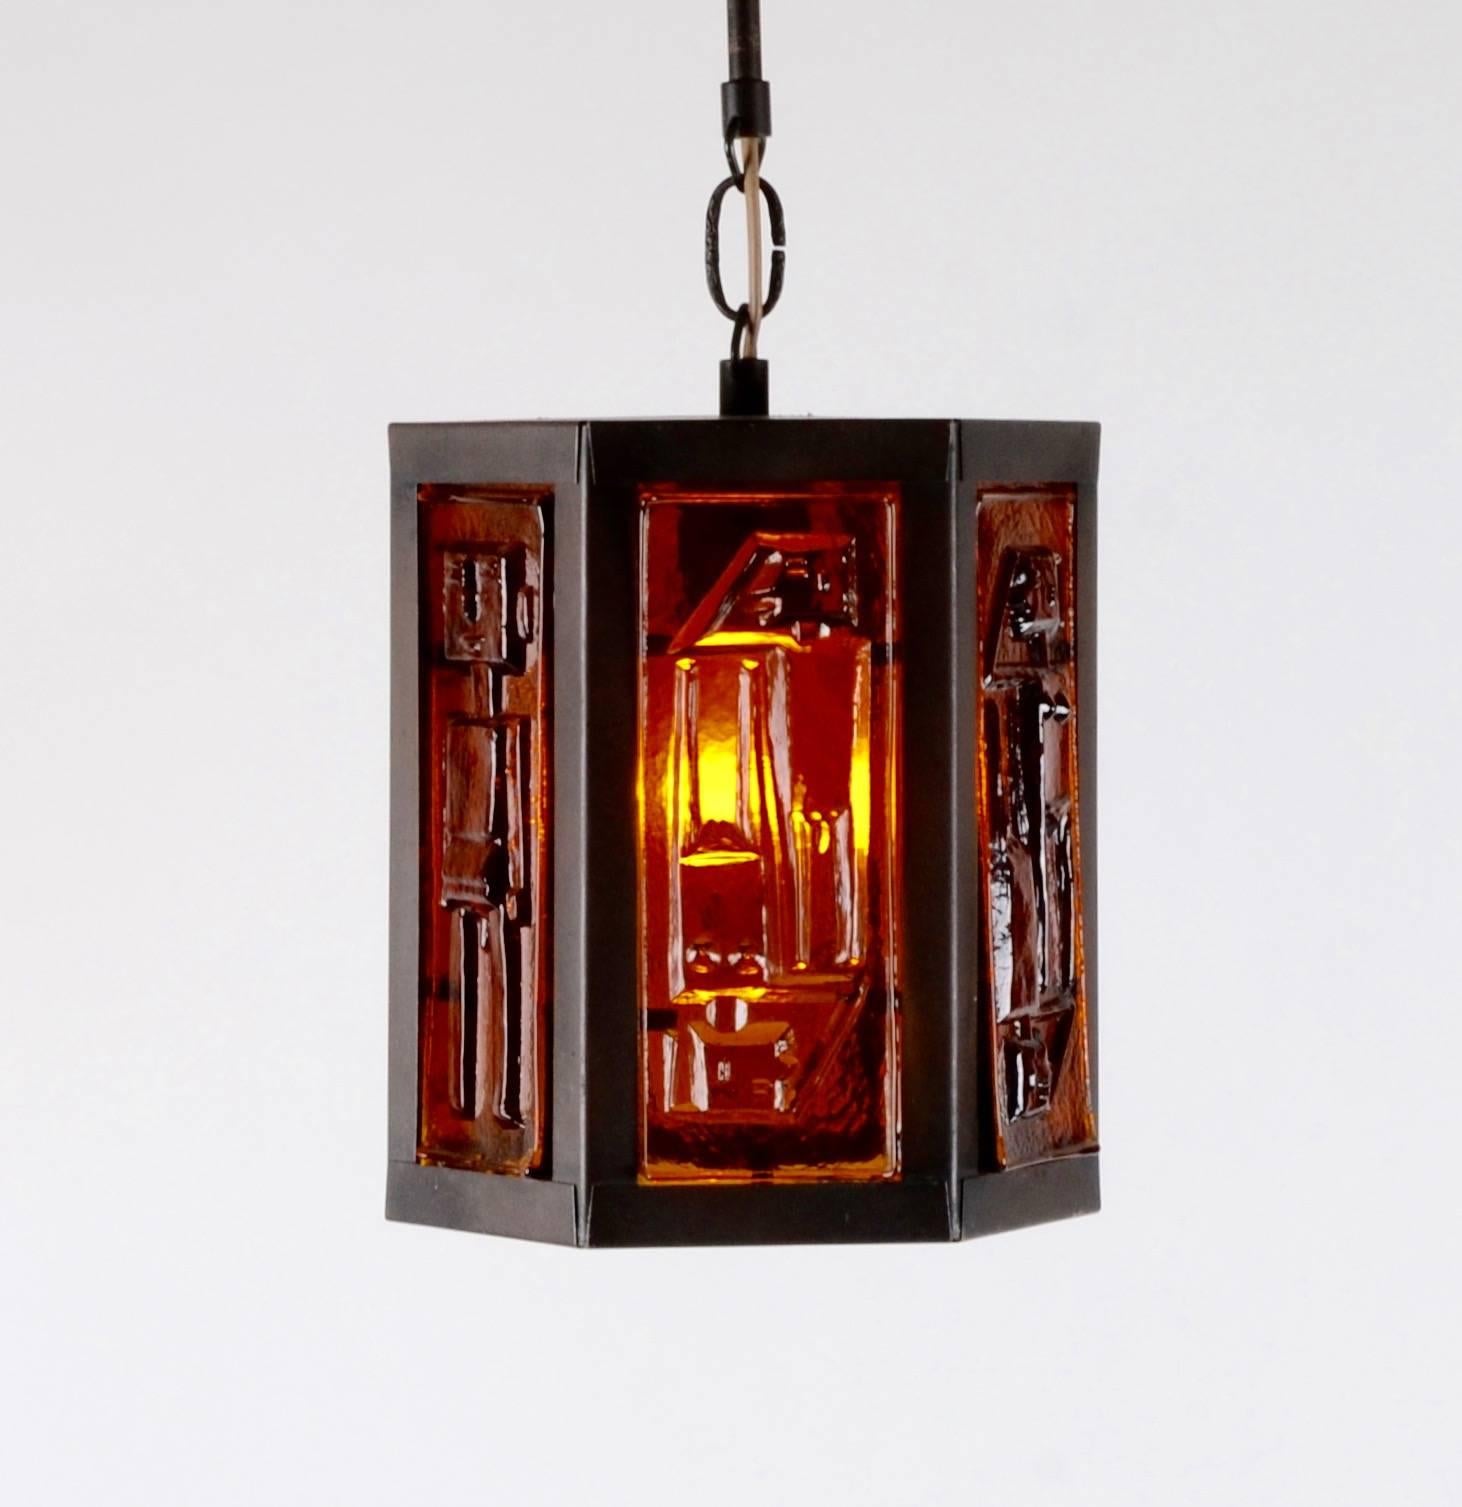 Pendant in cast iron and glass, designed by Erik Höglund for Boda, 1960s.